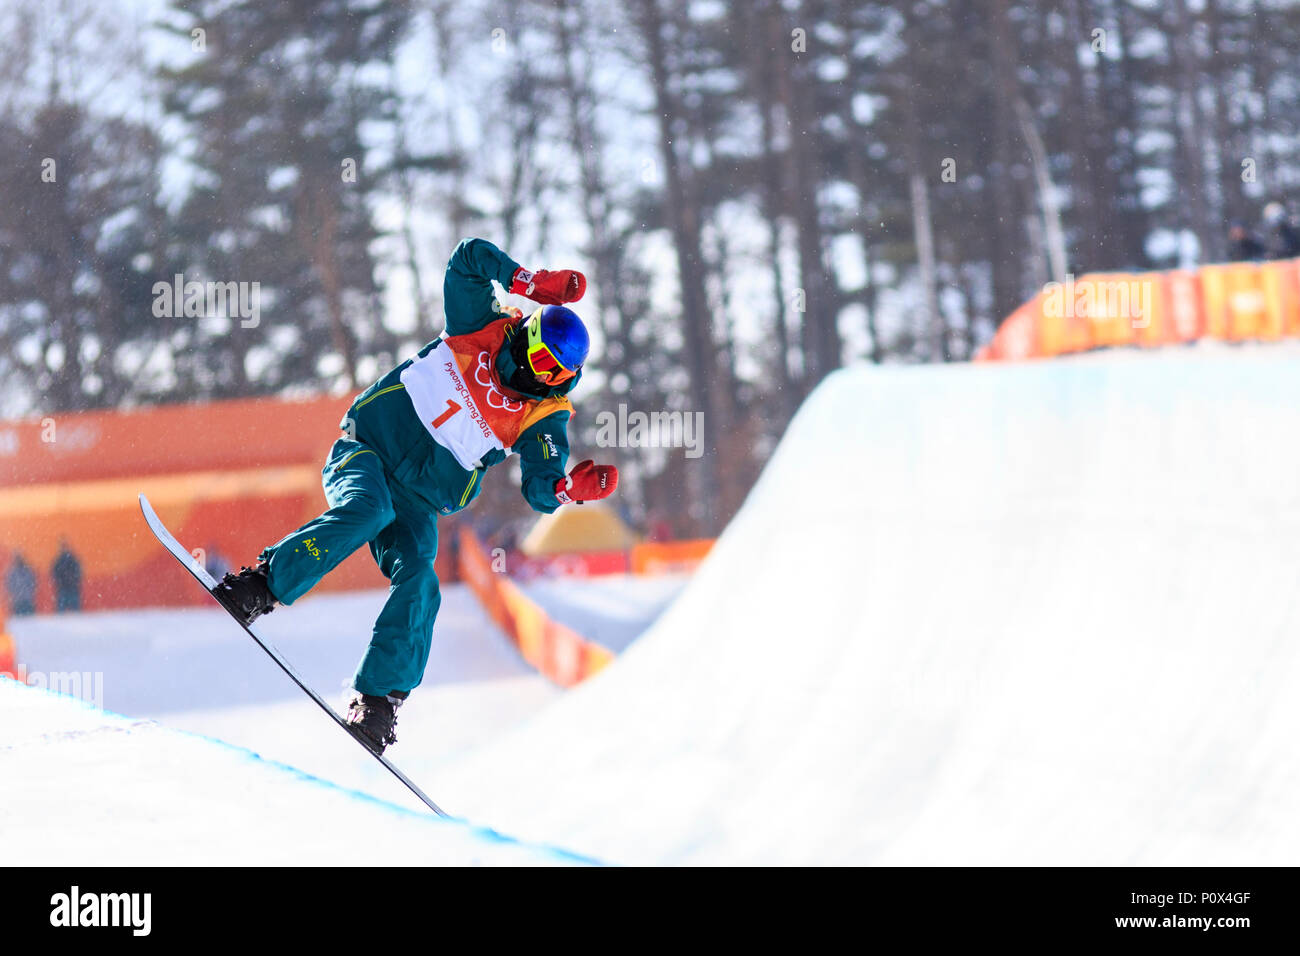 Scotty James (AUS)  competing in  the Men's Snowboarding Half Pipe Qualification at the Olympic Winter Games PyeongChang 2018 Stock Photo